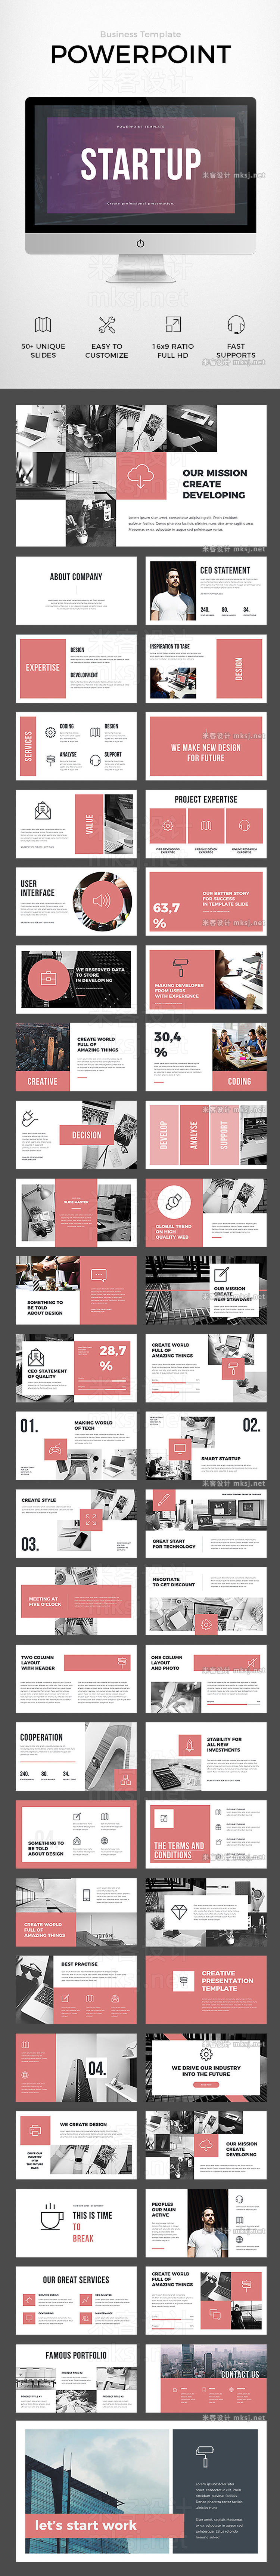 PPT模板 business powerpoint template